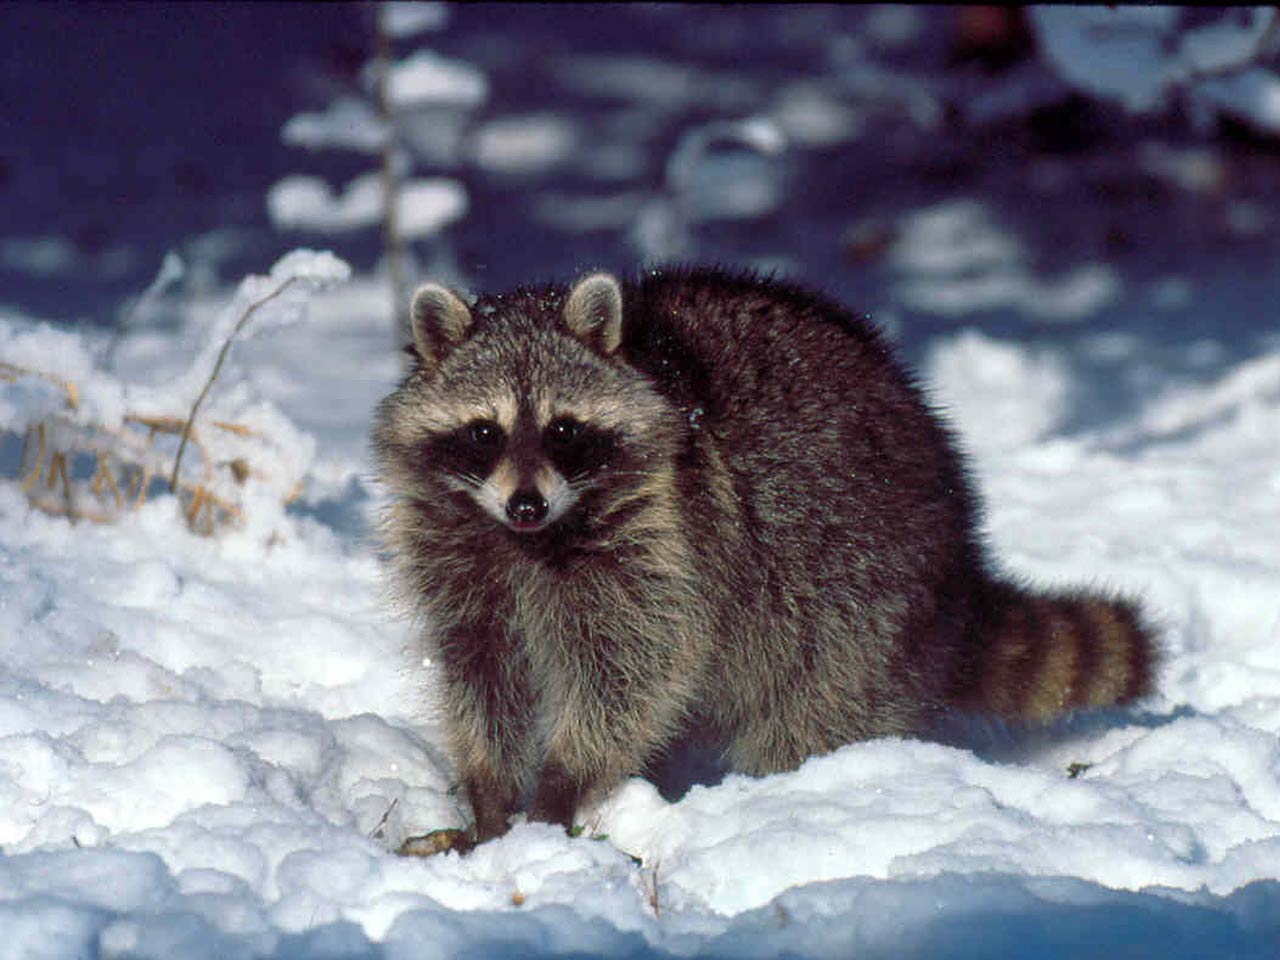 Raccoon Wallpapers Pets Cute And Docile Afalchi Free images wallpape [afalchi.blogspot.com]